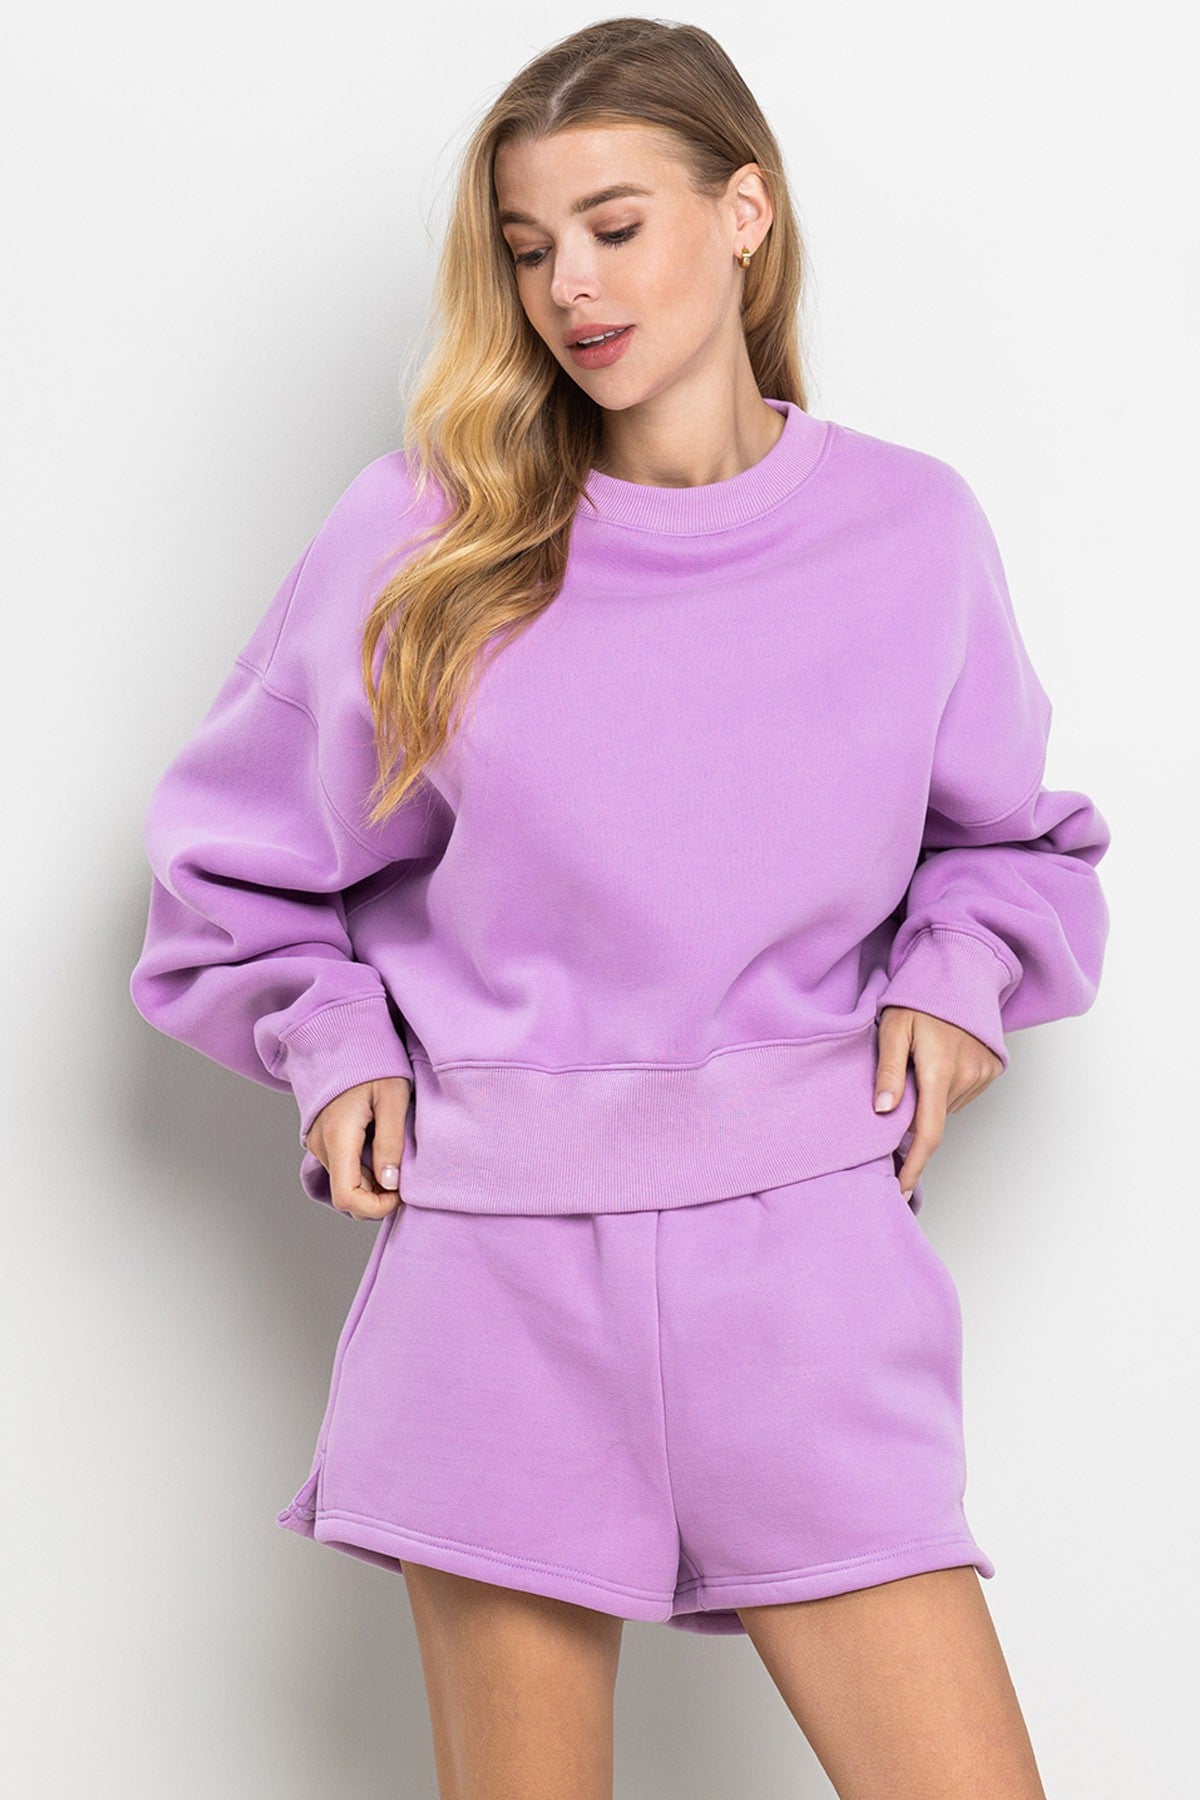 Snuggle Me Cropped Sweater - Lavender